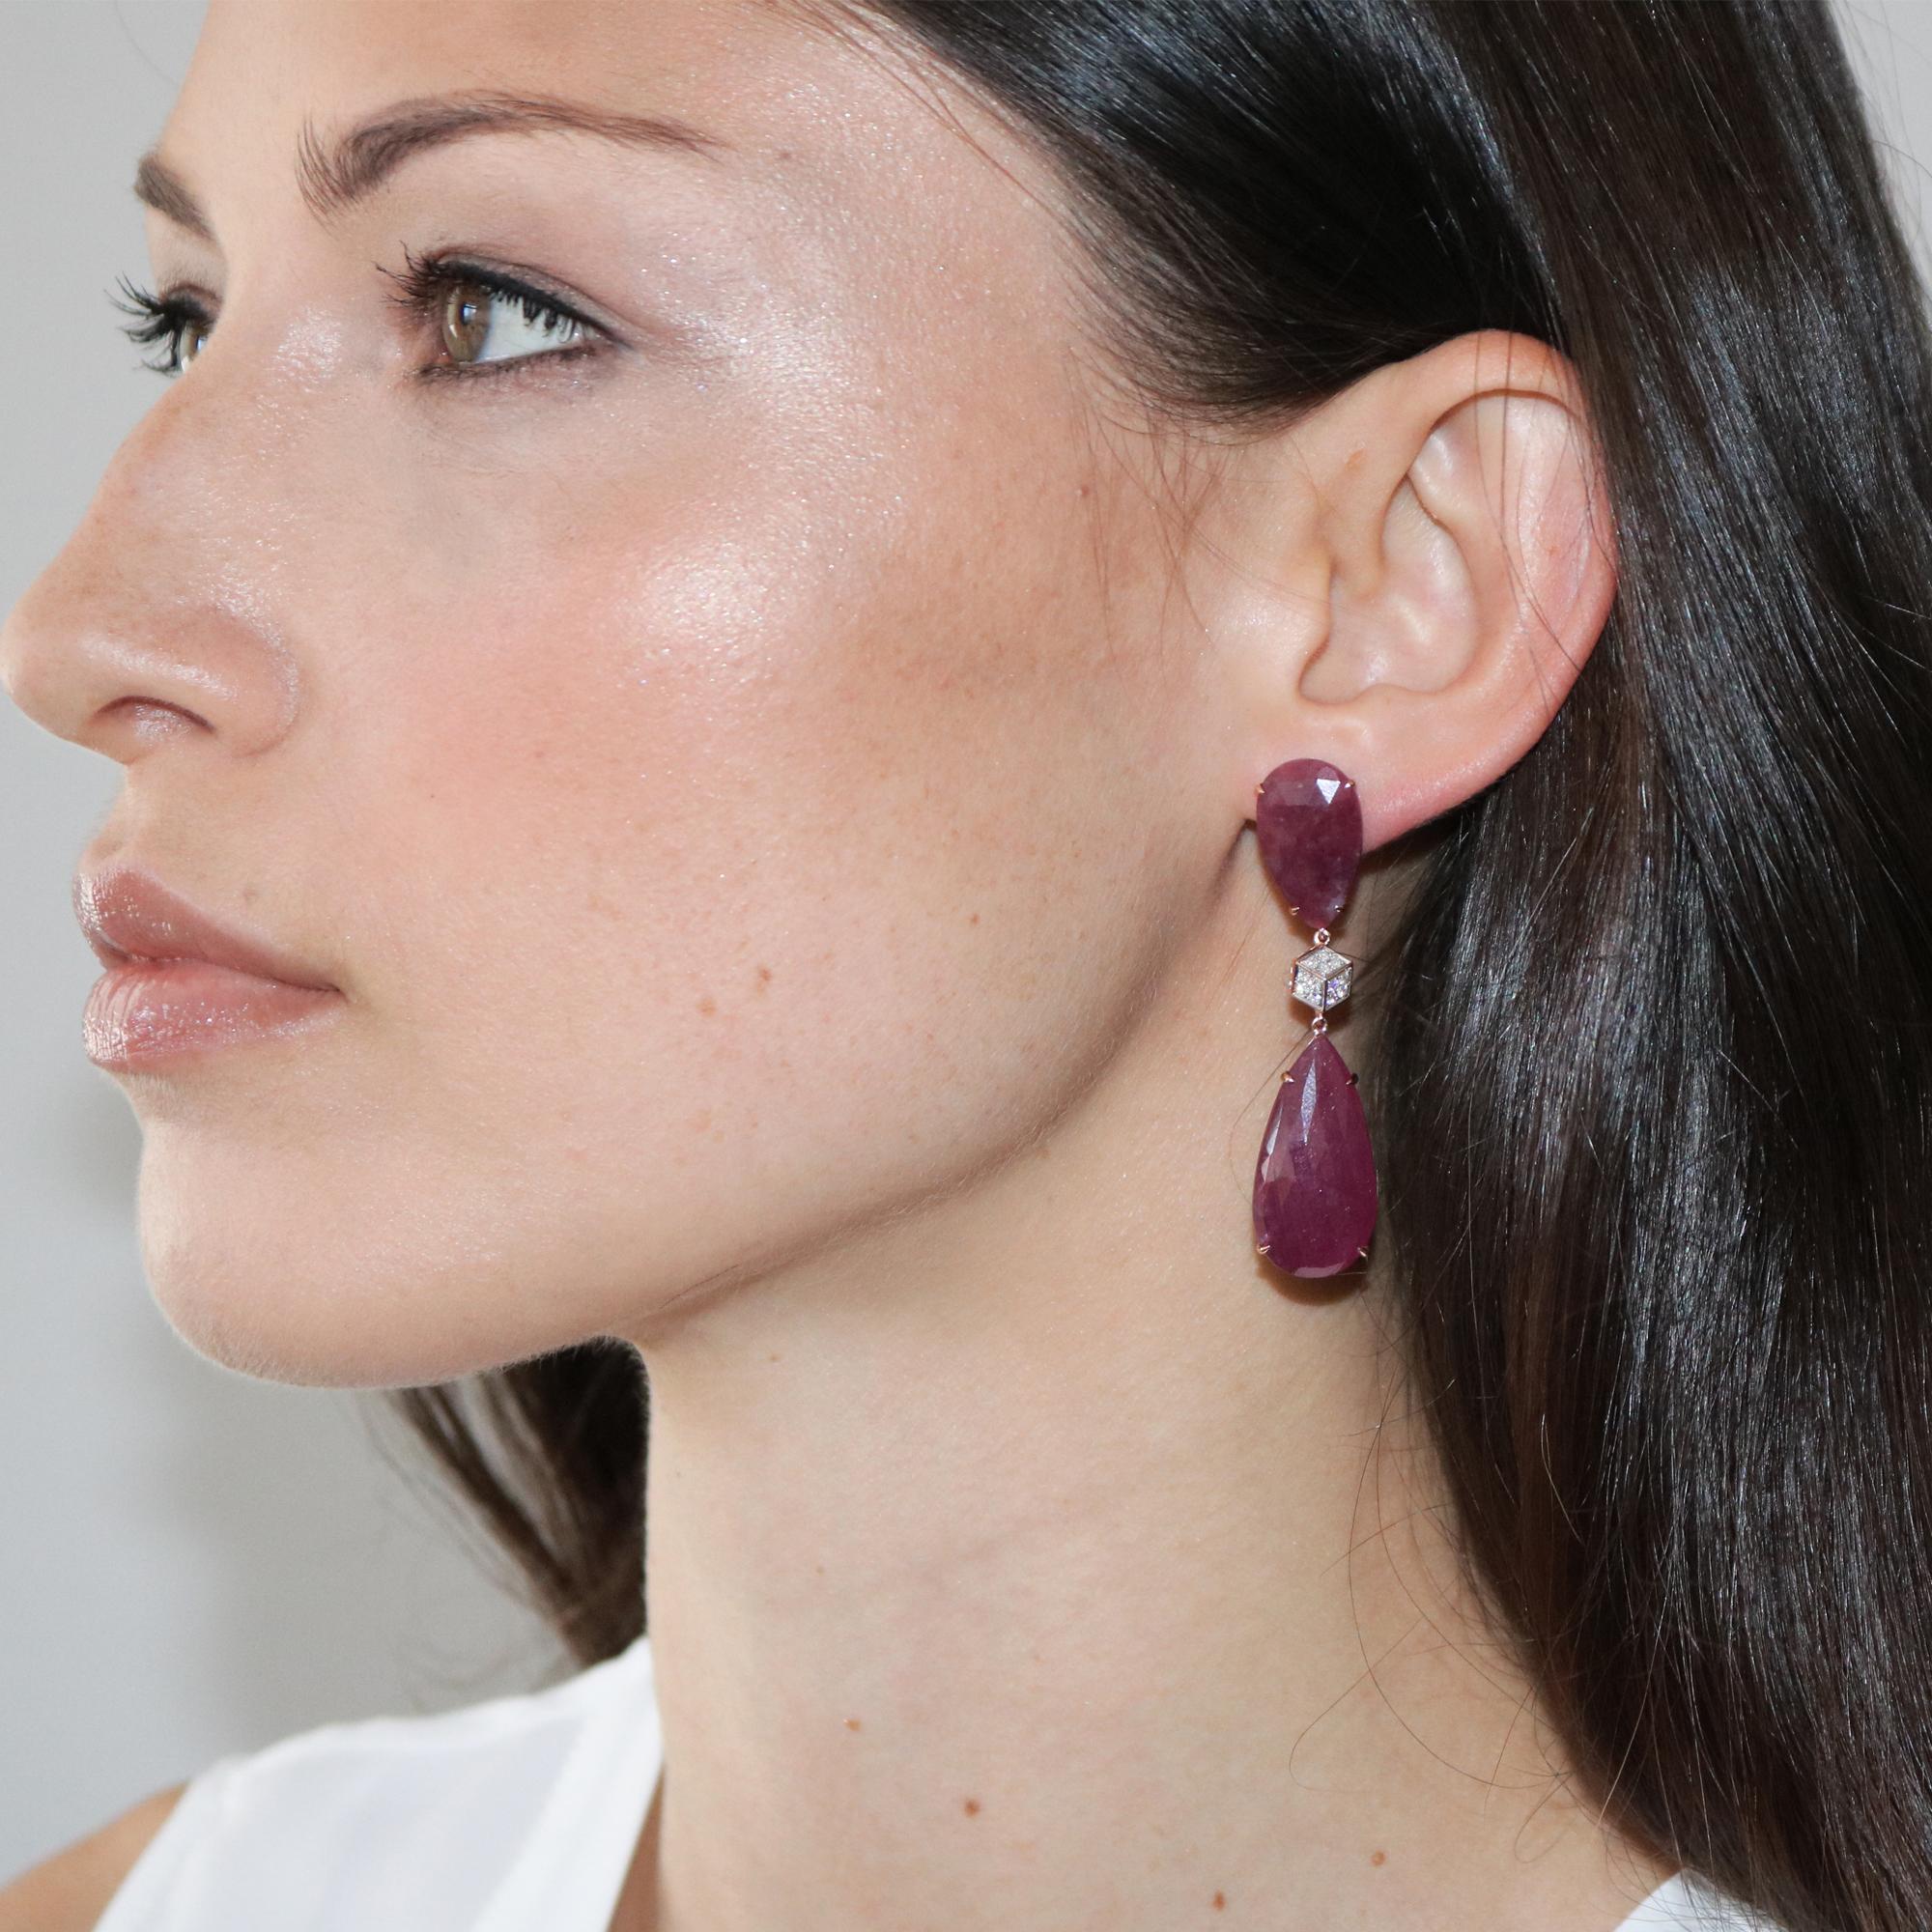 One of a kind pear shape ruby earrings with 18kt rose gold signature Brillante element with round, brilliant diamonds. 

The weight of each earring is light and will not pull down the ear and it is designed specifically for maximum comfort.

The